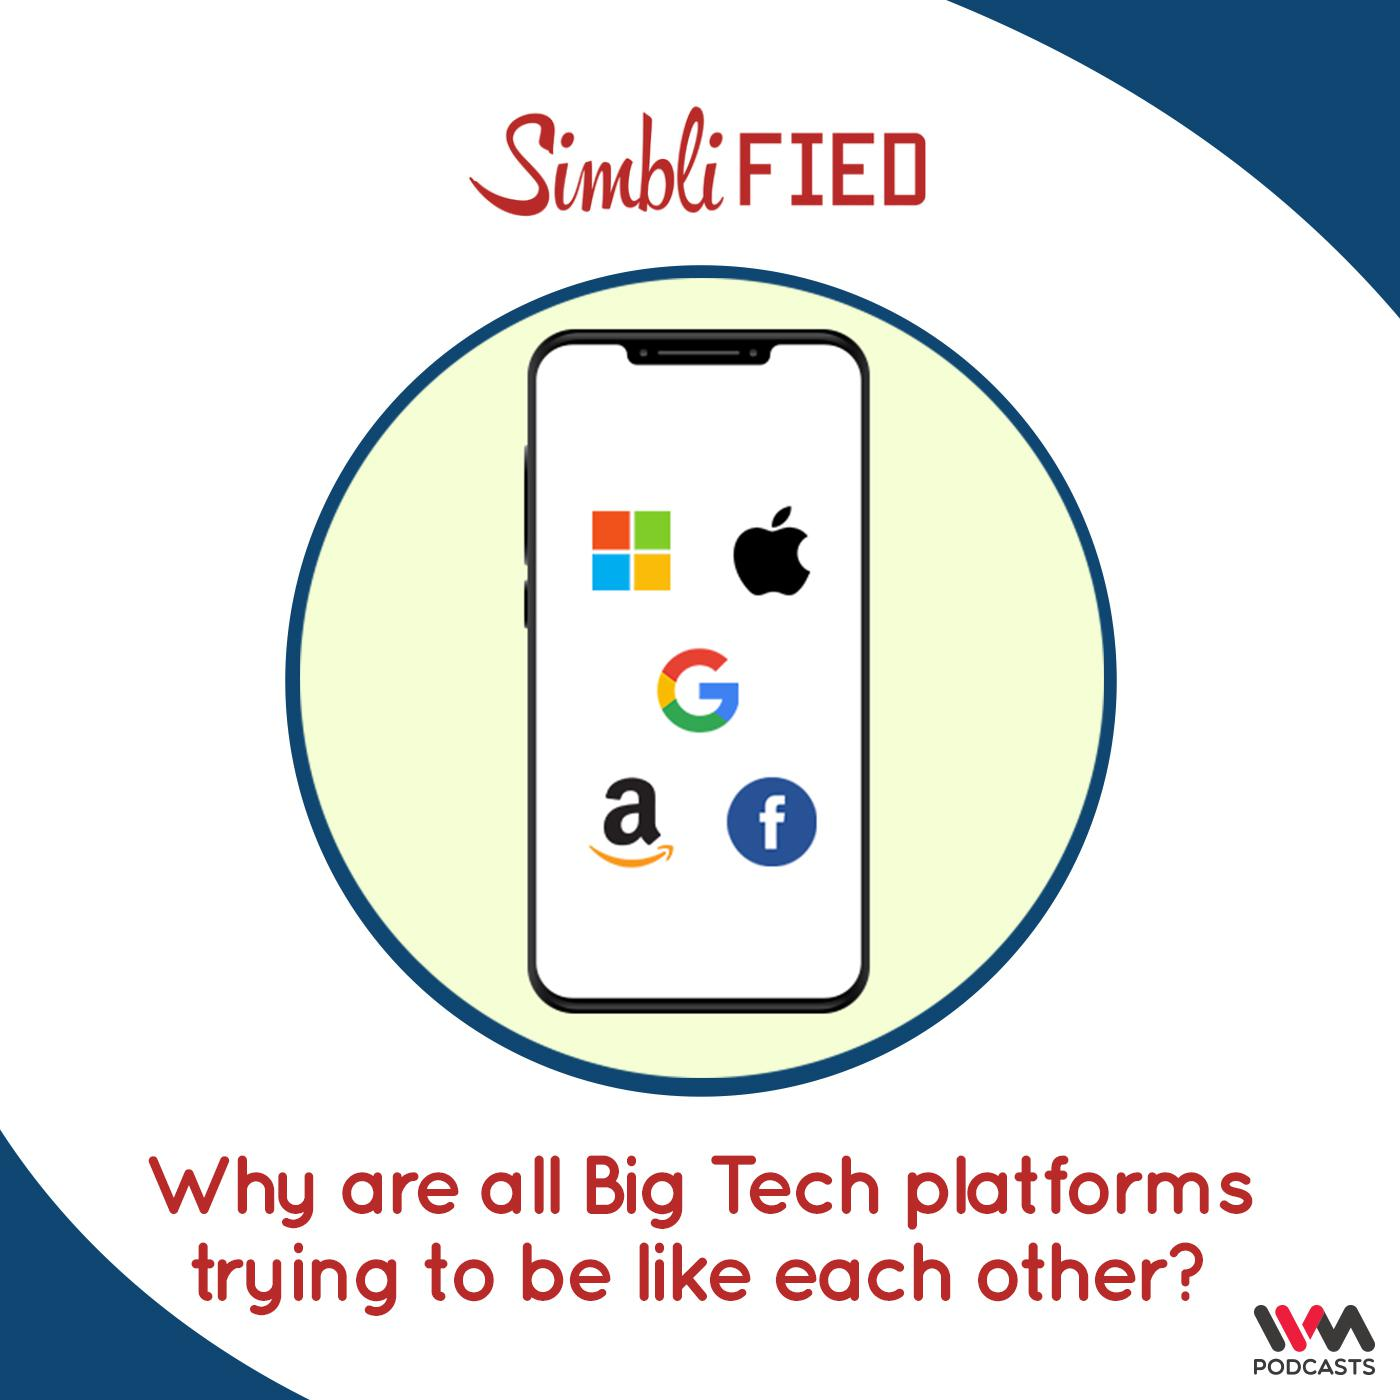 Why are all Big Tech platforms trying to be like each other?